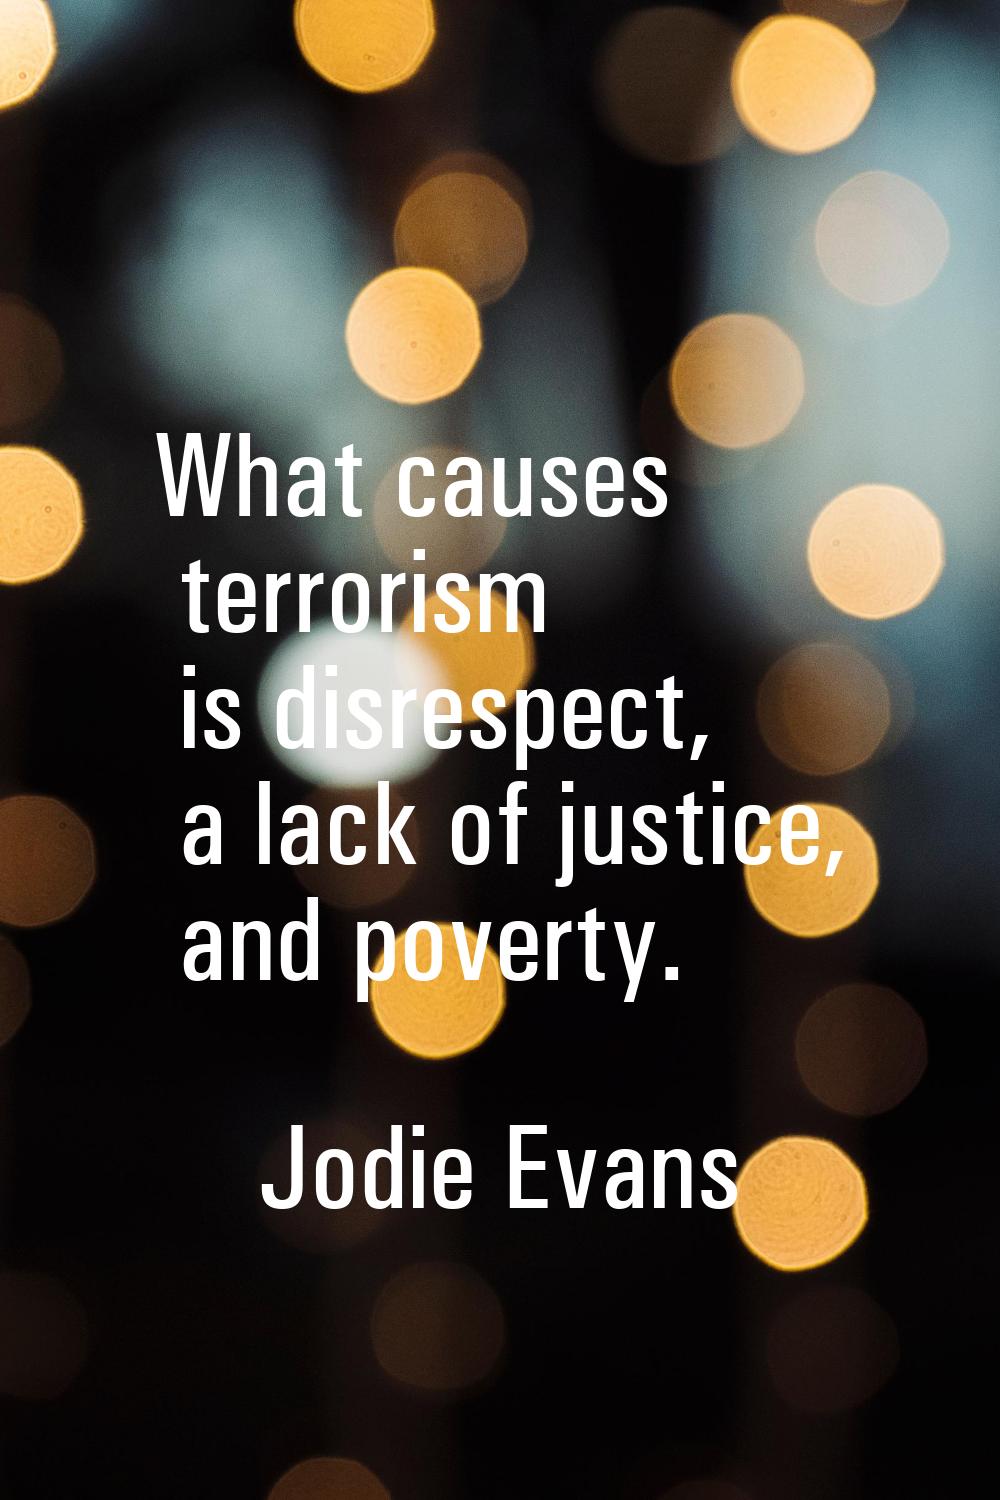 What causes terrorism is disrespect, a lack of justice, and poverty.